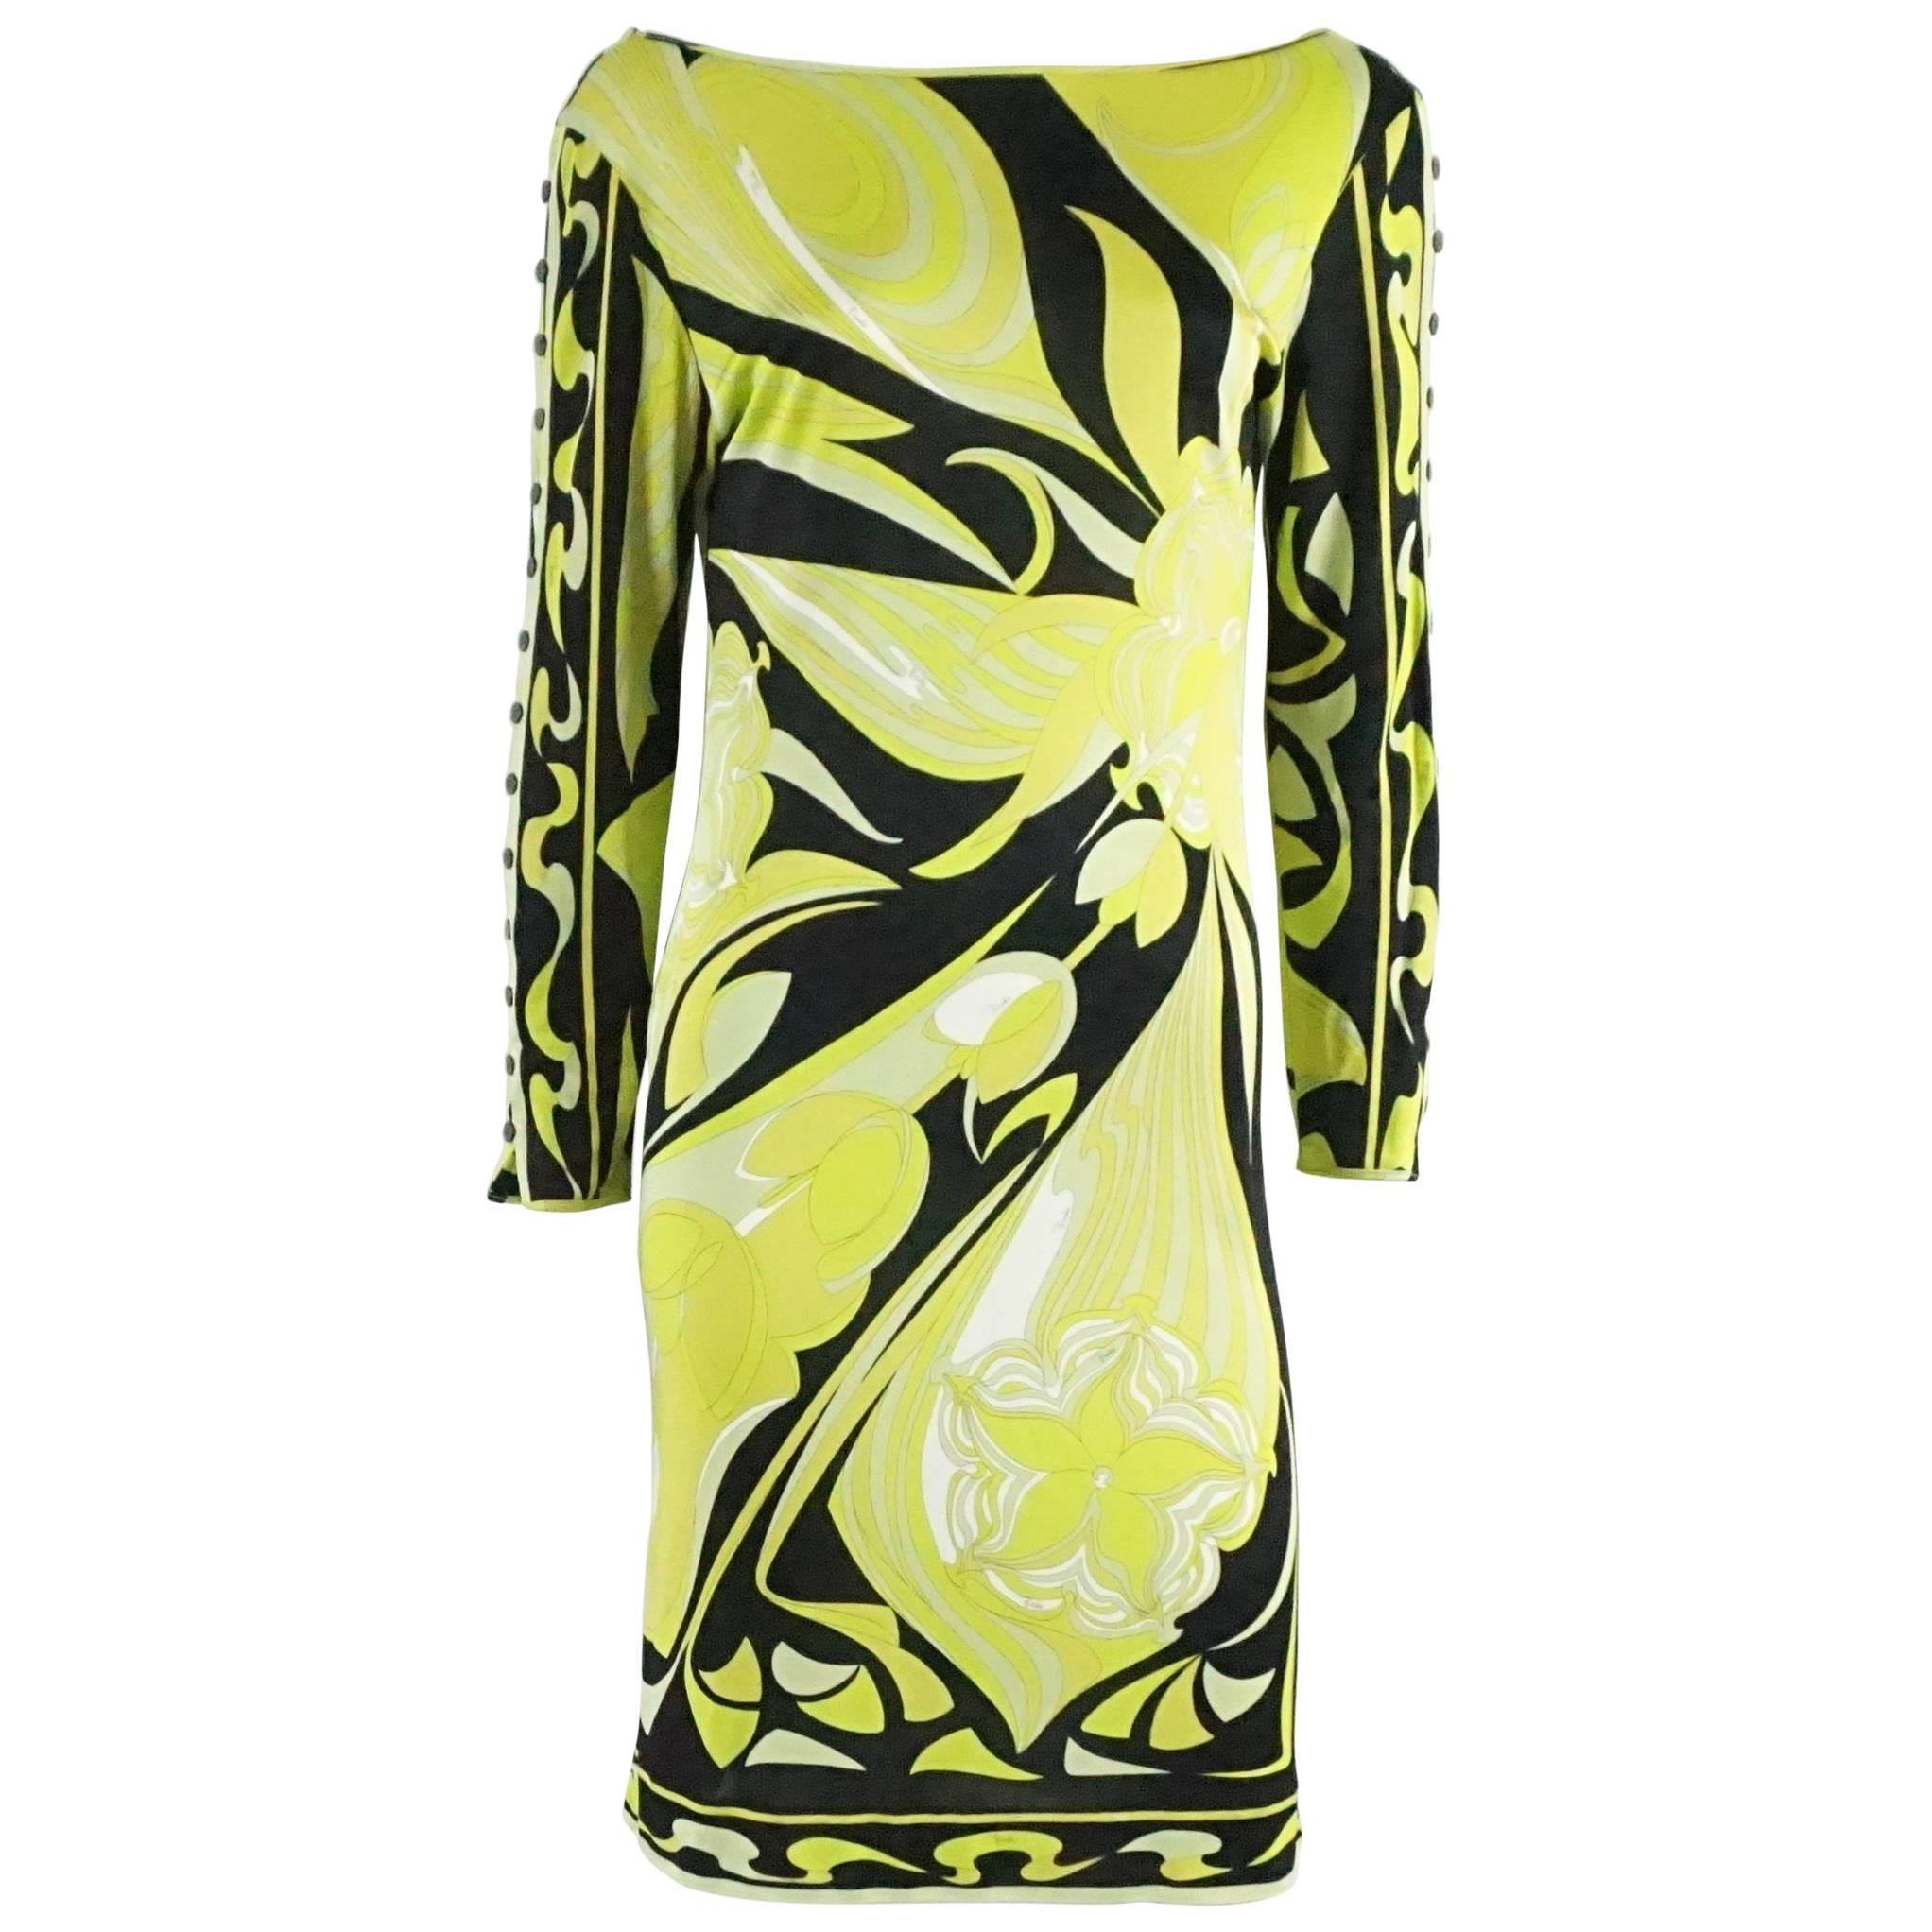 Emilio Pucci Green and Black Printed Long Sleeve Dress - 40